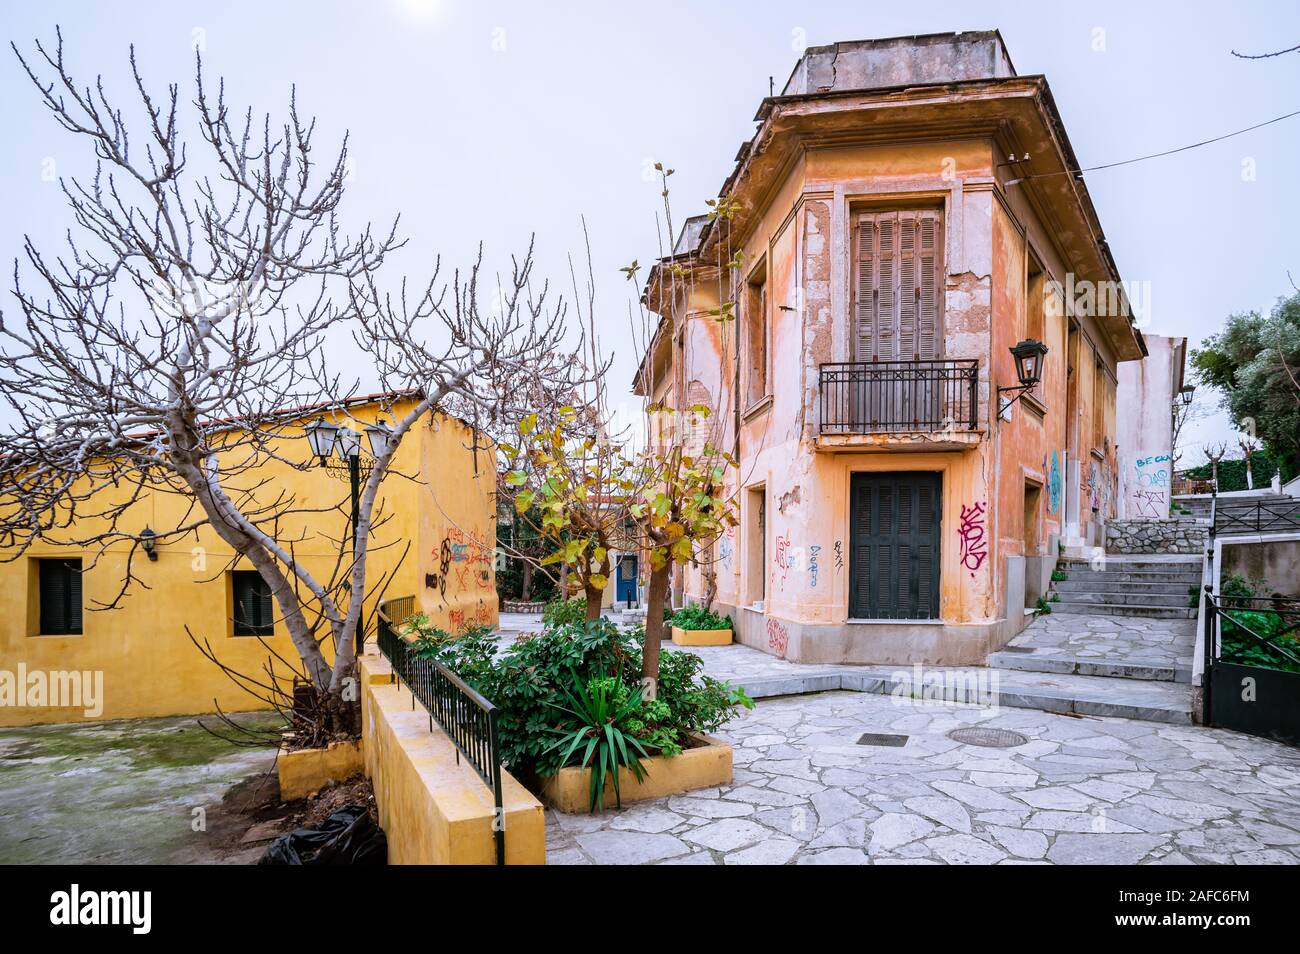 Athens / Greece - February 1 2014: View of abandoned house with graffiti, in the historic neighbourhood of Plaka. Stock Photo